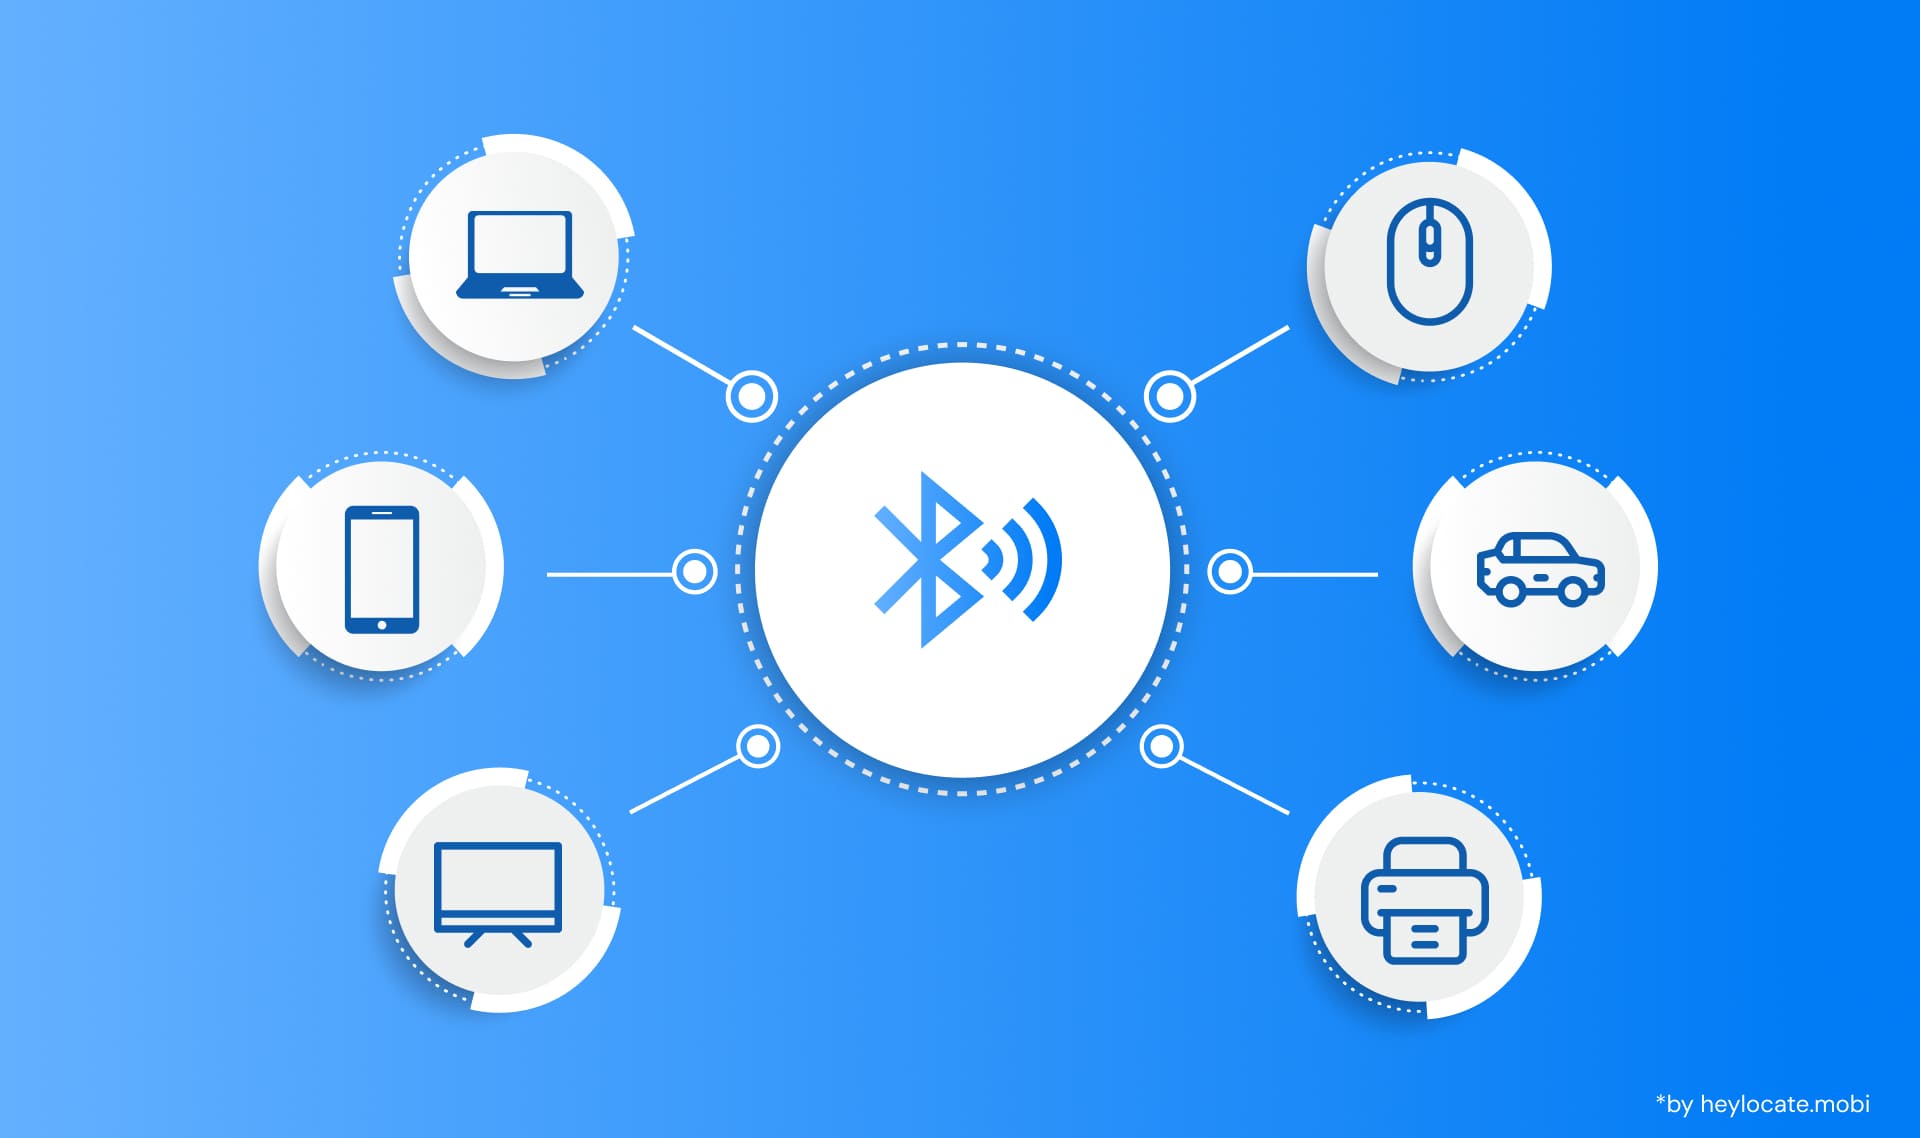 An image of the central Bluetooth icon with lines connecting the various devices it can work with: laptop, smartphone, mouse, car, printer, and TV